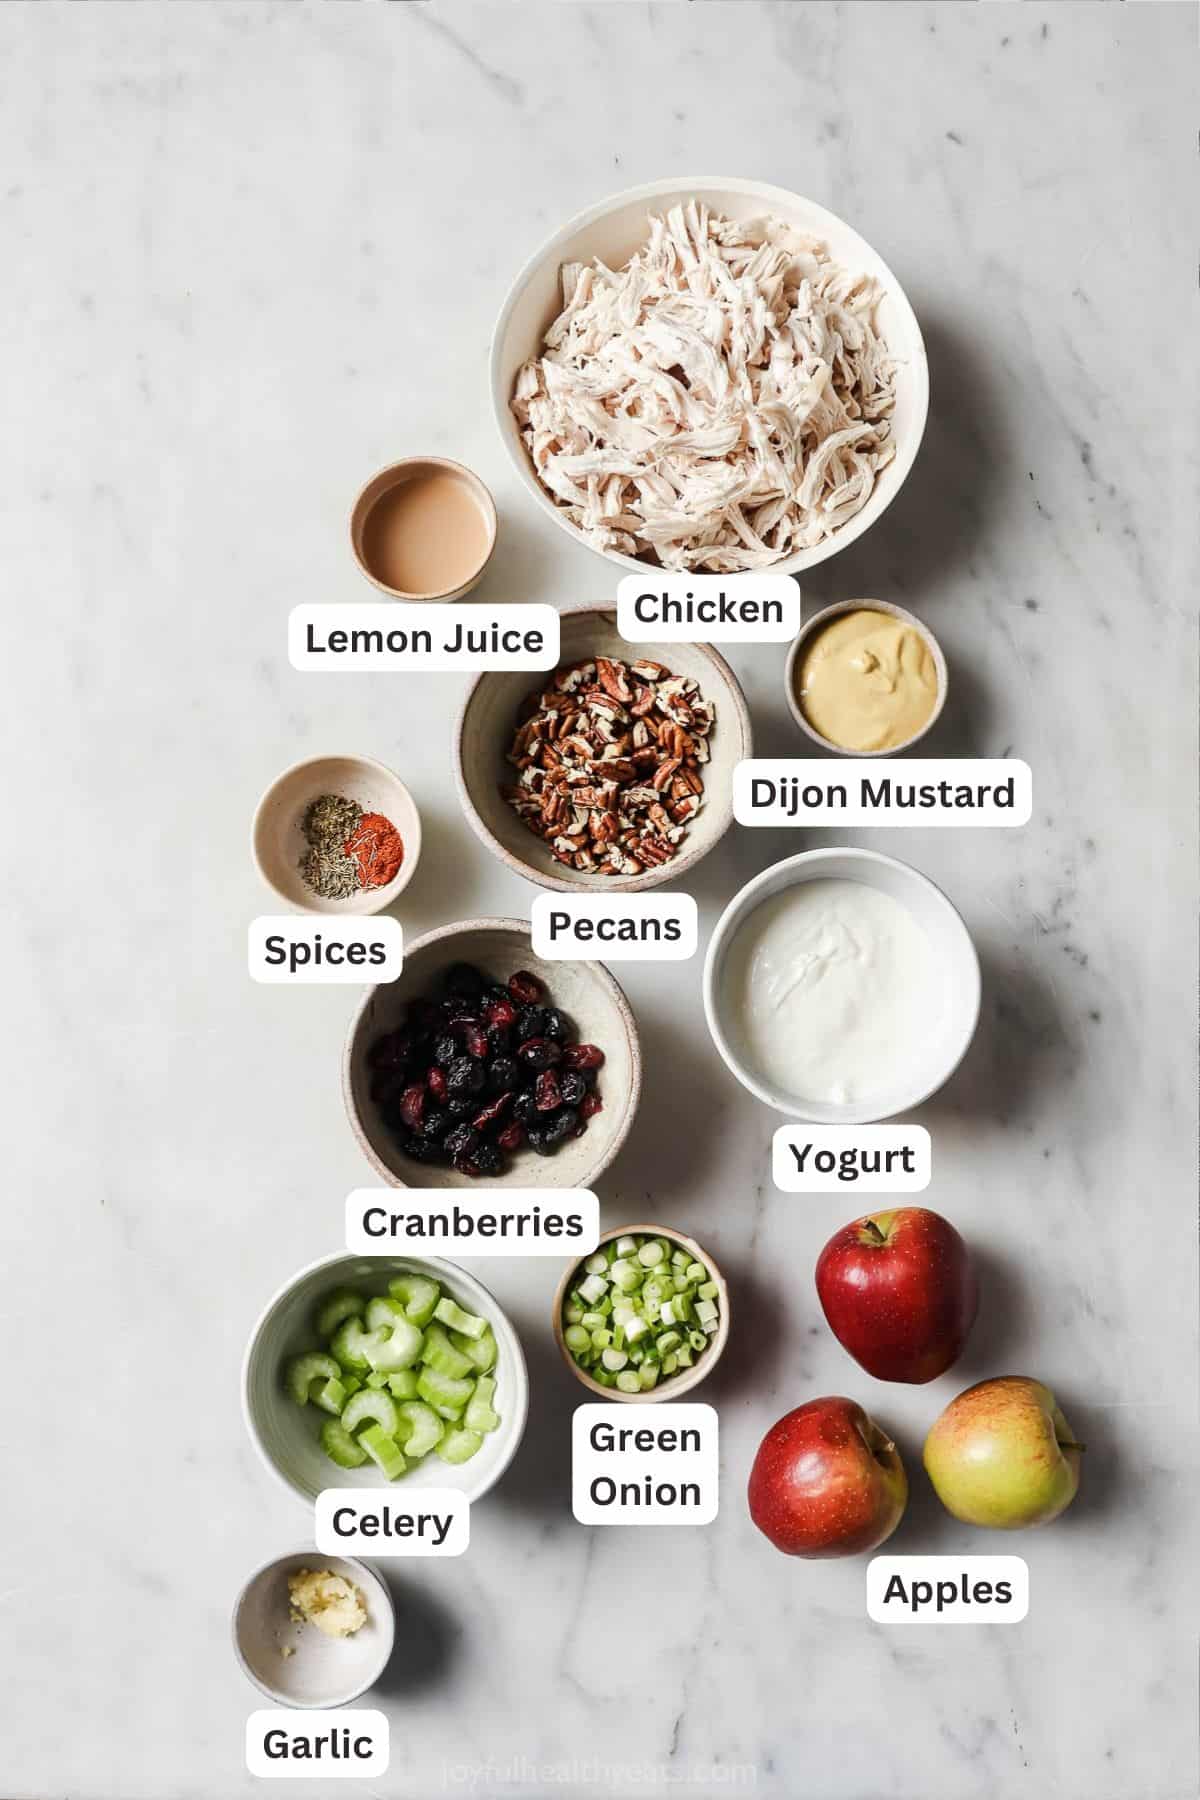 Labeled ingredients for the cranberry chicken salad.